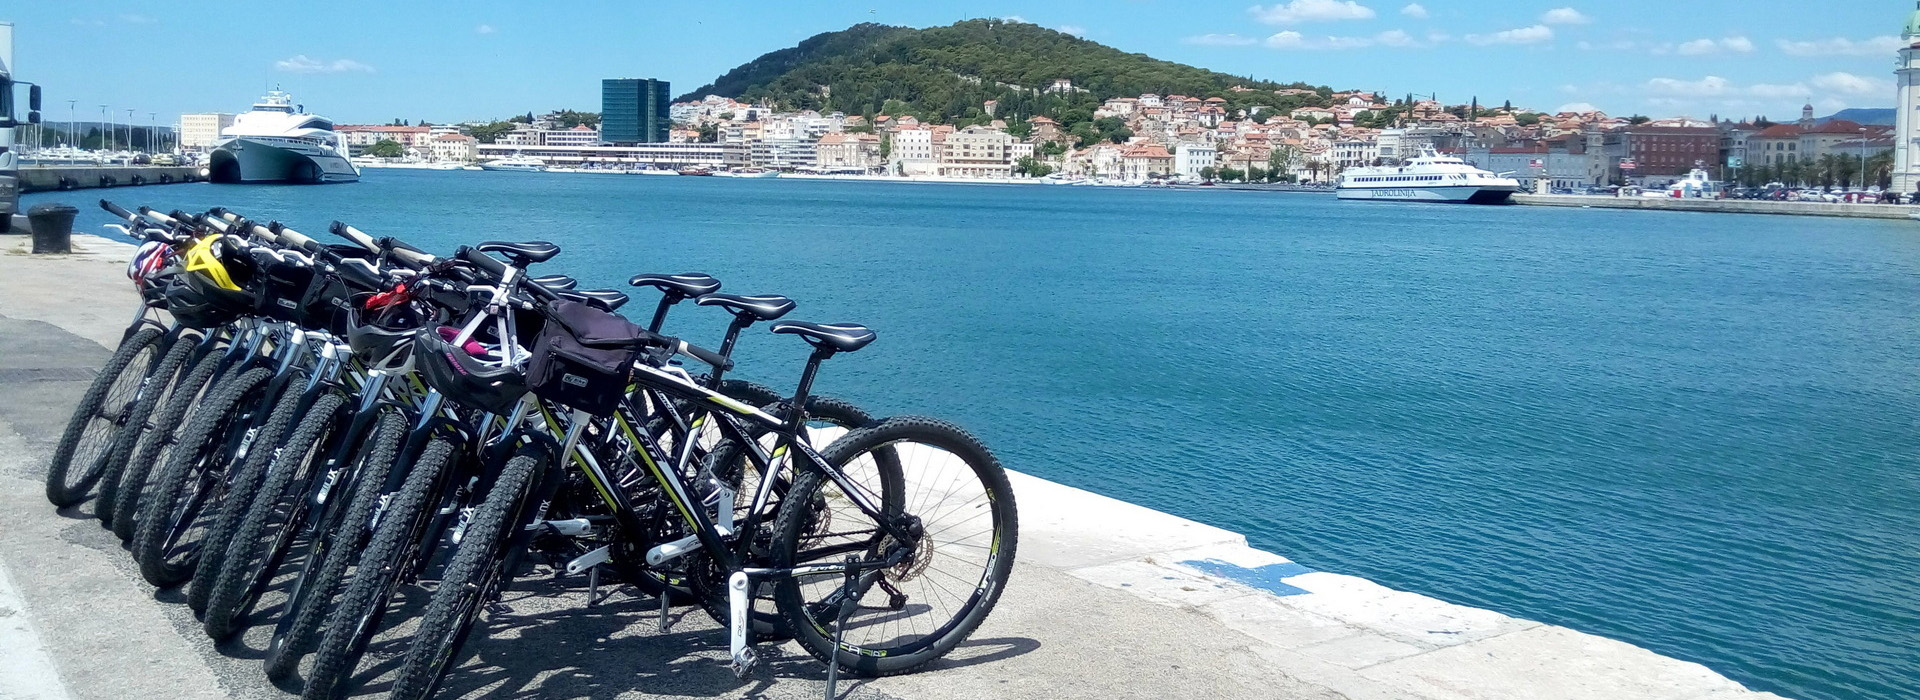 Cycling on the Dalmatian Coast guided holiday - Split